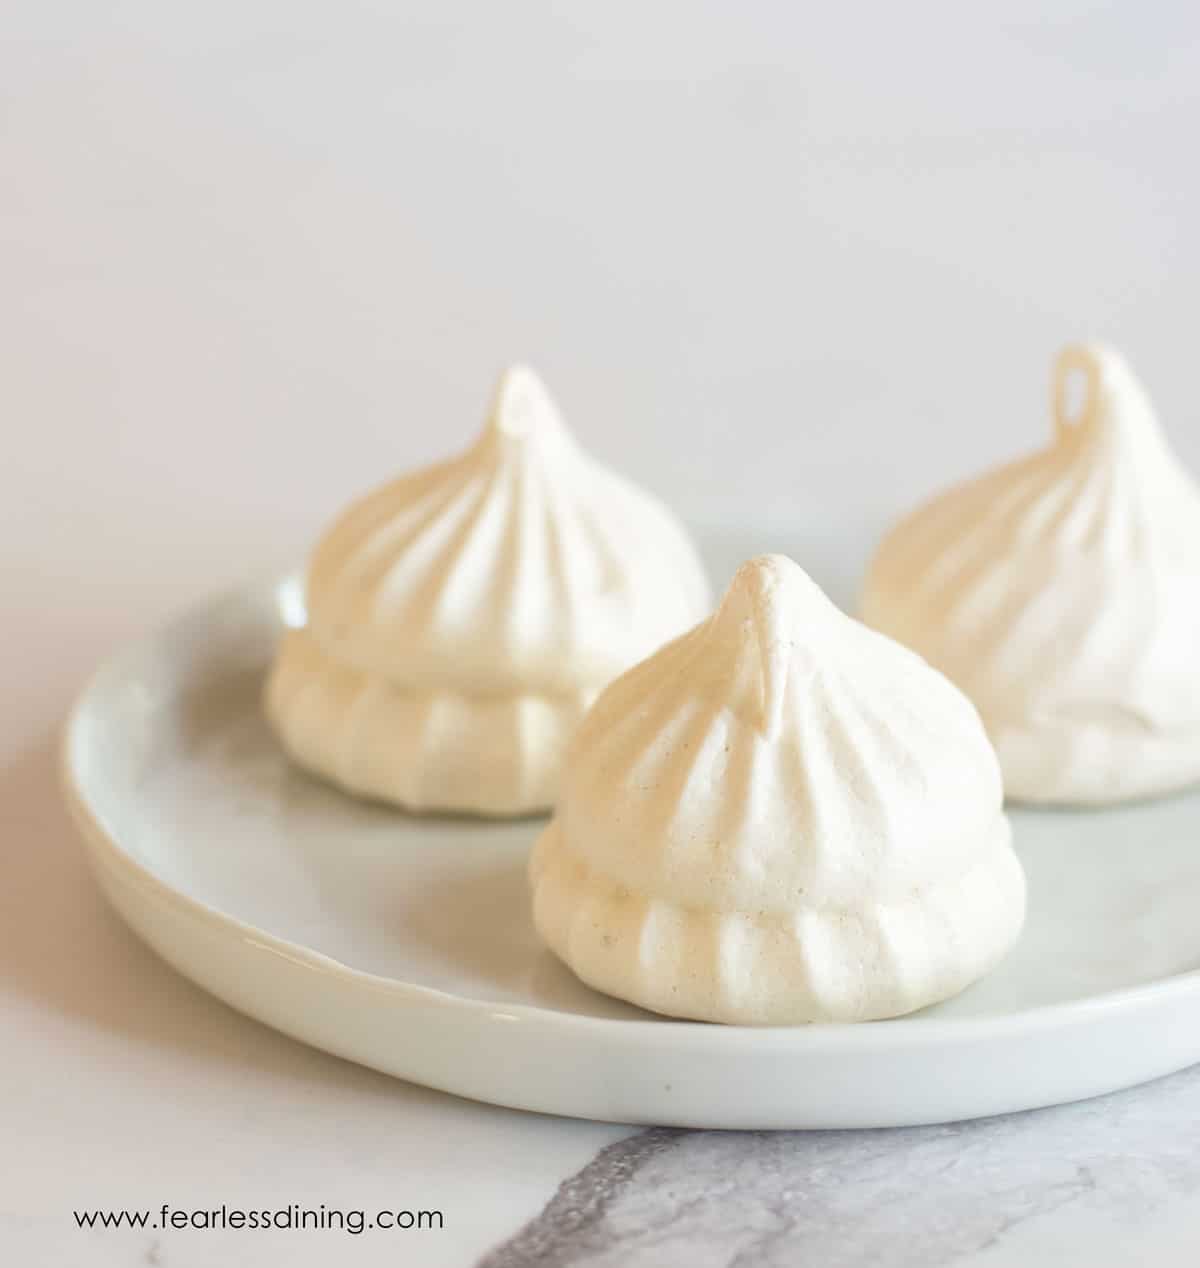 Three meringue cookies on a small white plate.